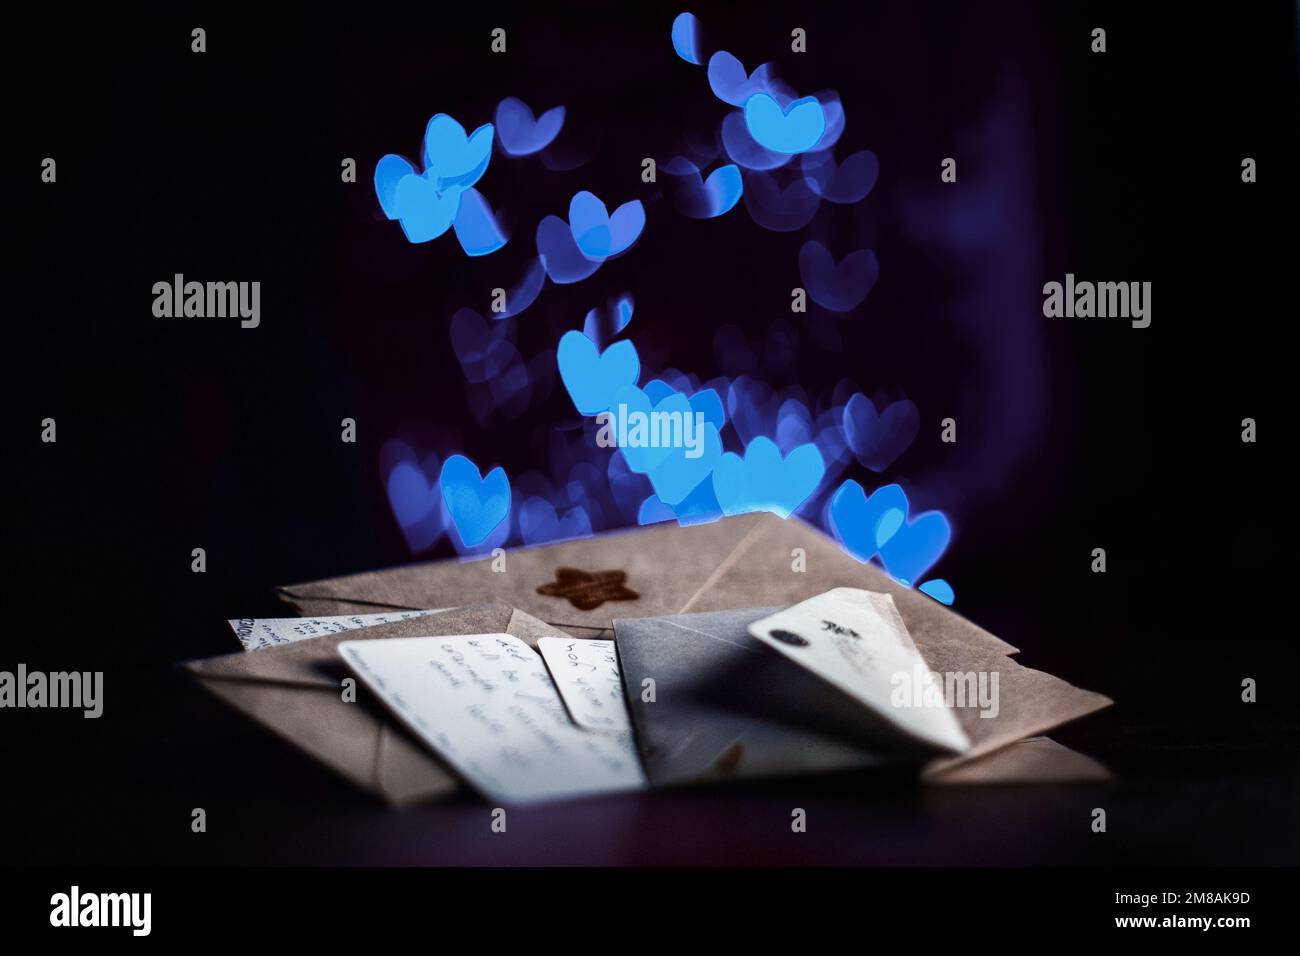 Valentines day letters, cards, blue glowing hearts in the dark Stock Photo